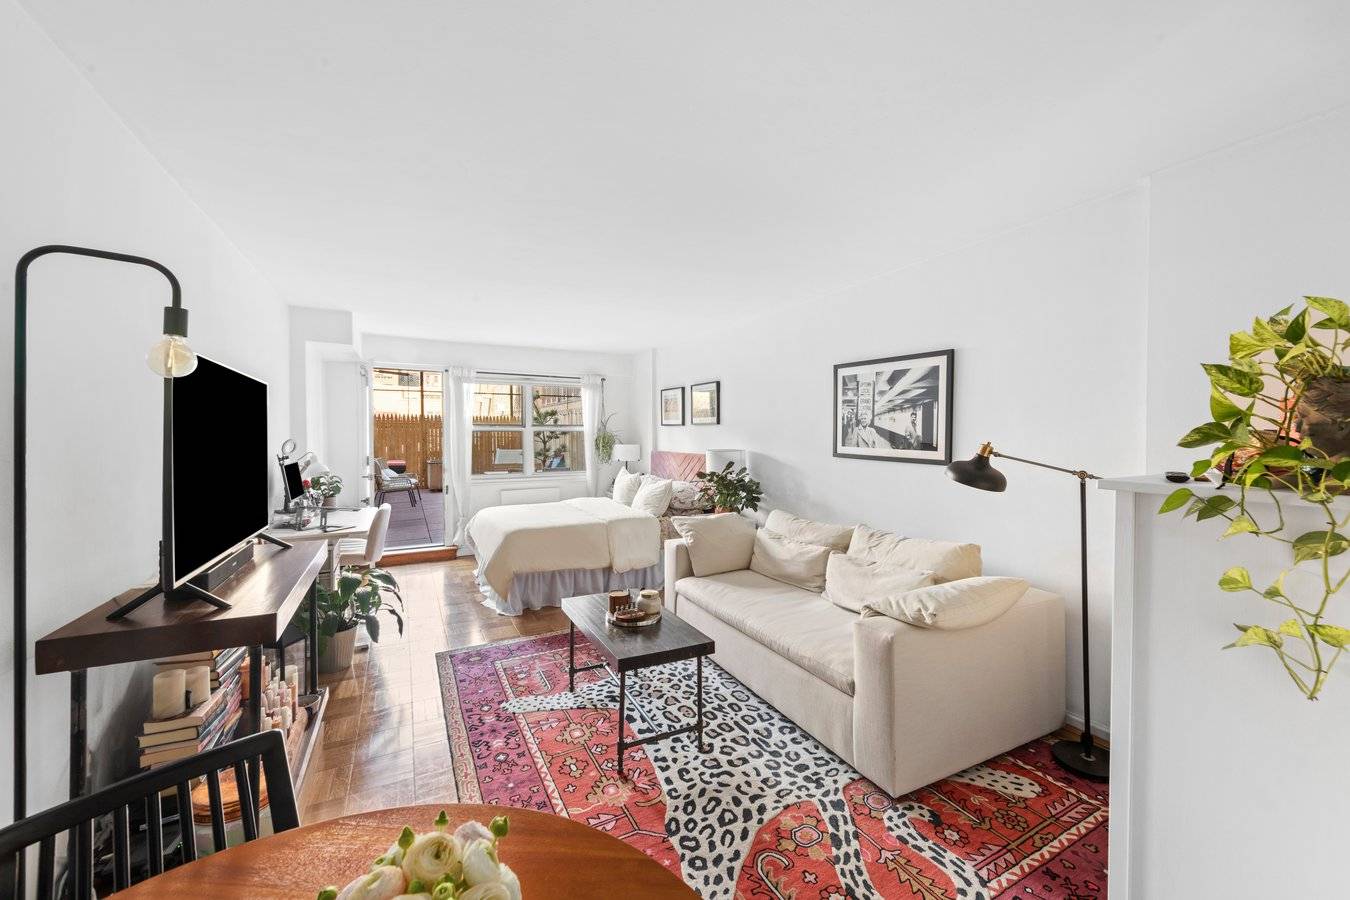 Welcome home to your tranquil sanctuary in the heart of the Upper East side.